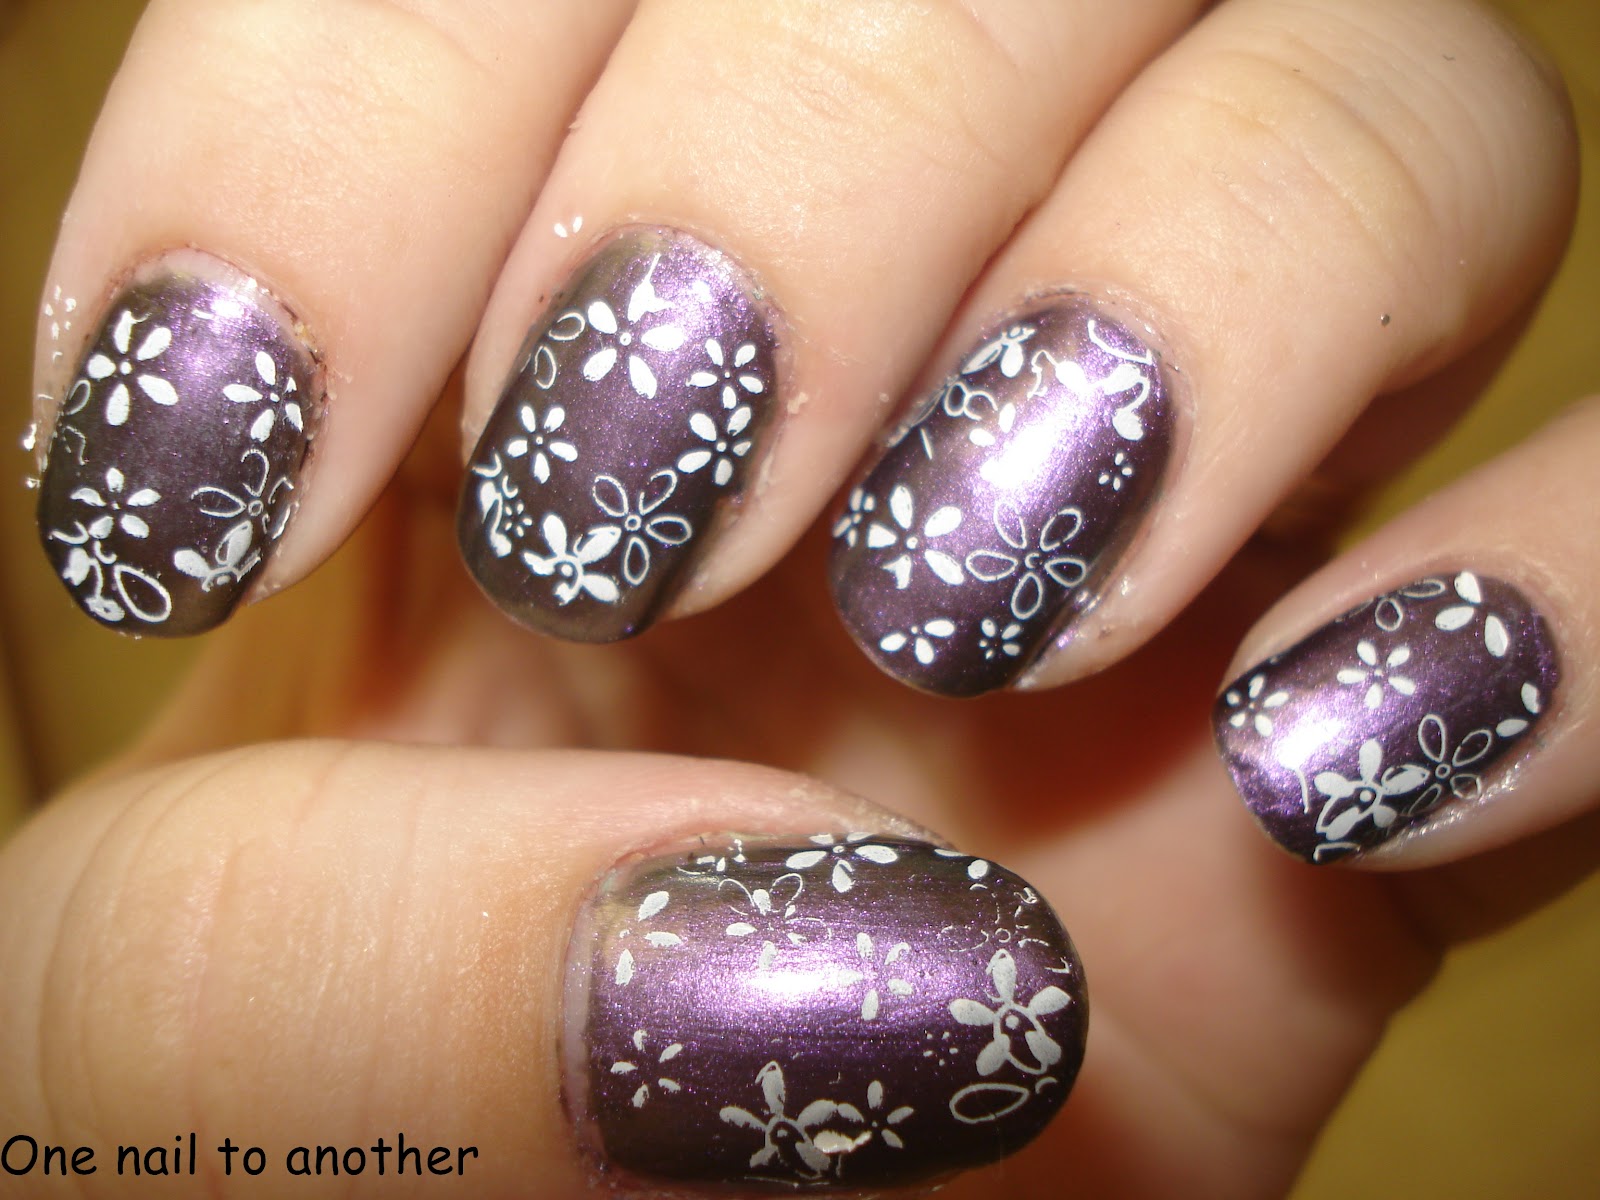 8. Nail Art Stamping with Powder vs. Stickers: Which is Better? - wide 1